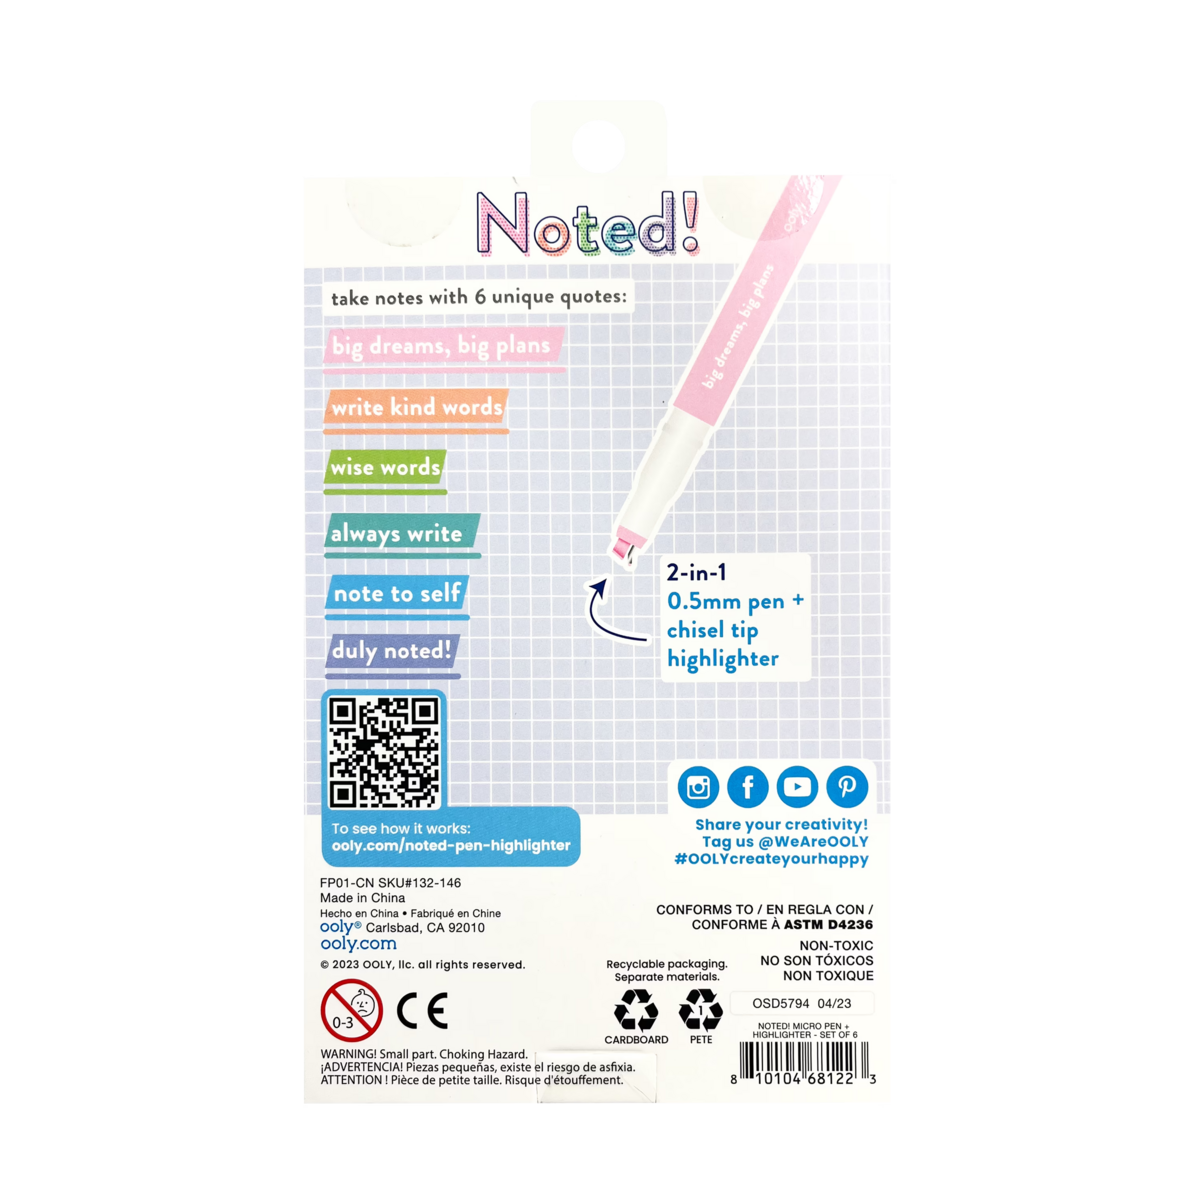 Noted! 2-in-1 micro fine pen and highlighter back of packaging